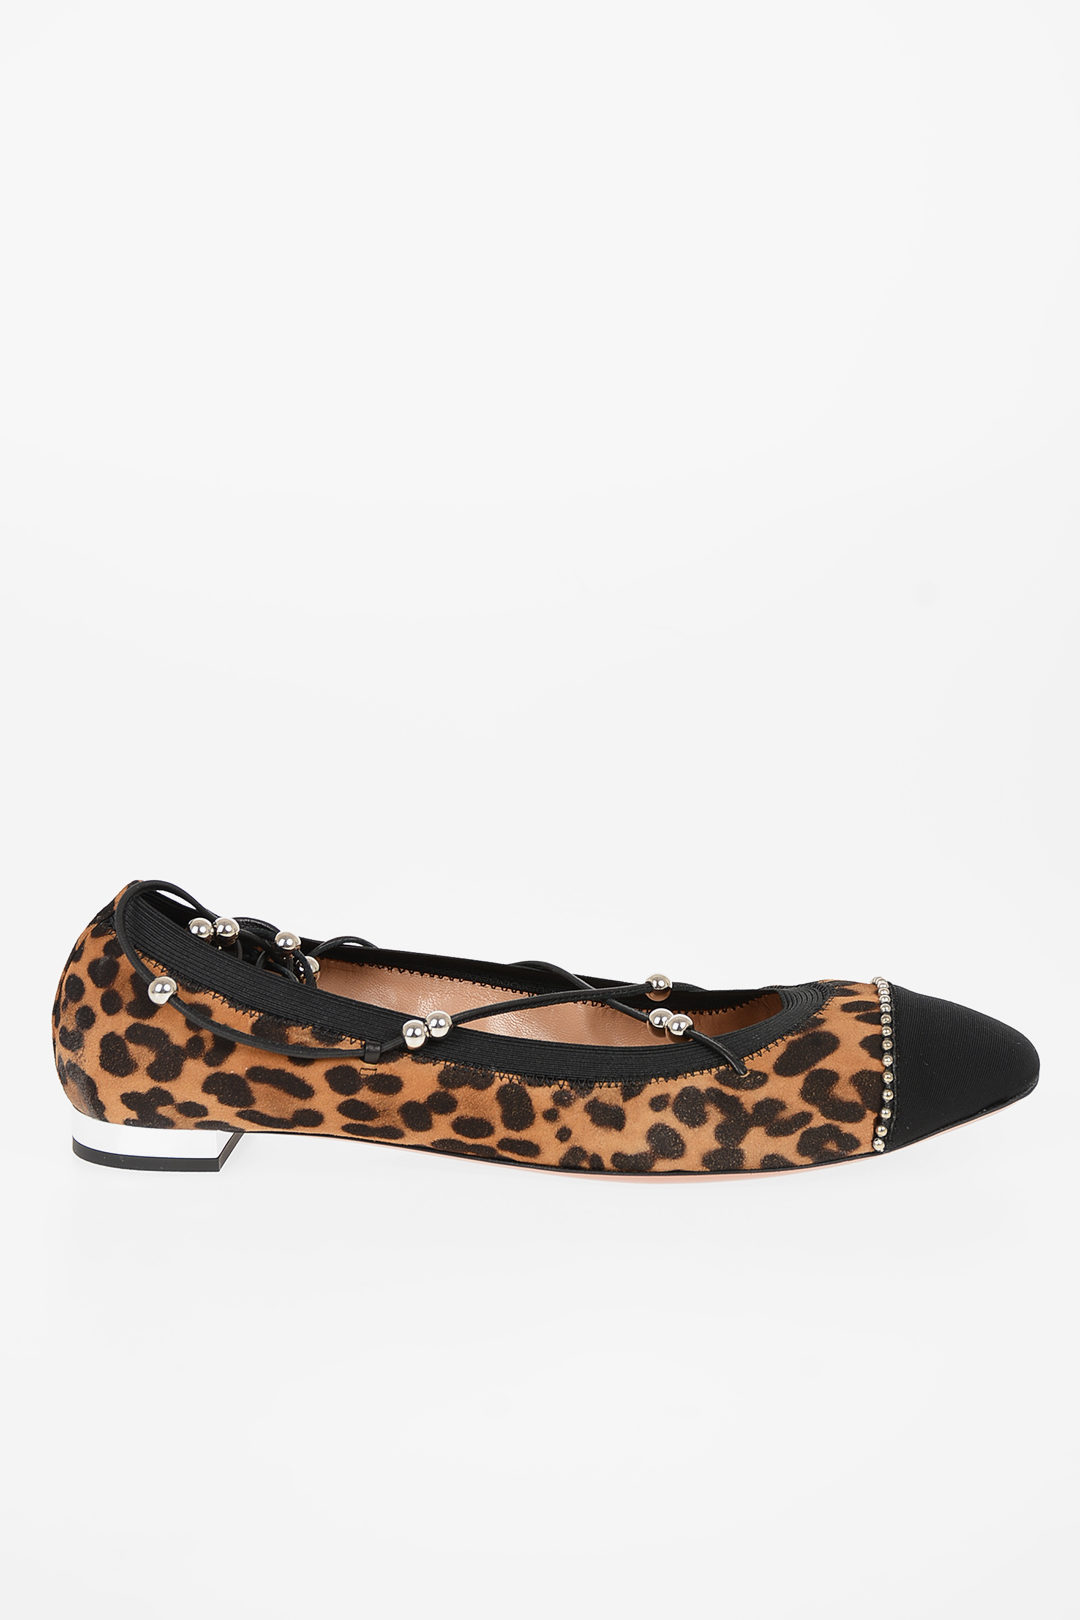 leather leopard flats